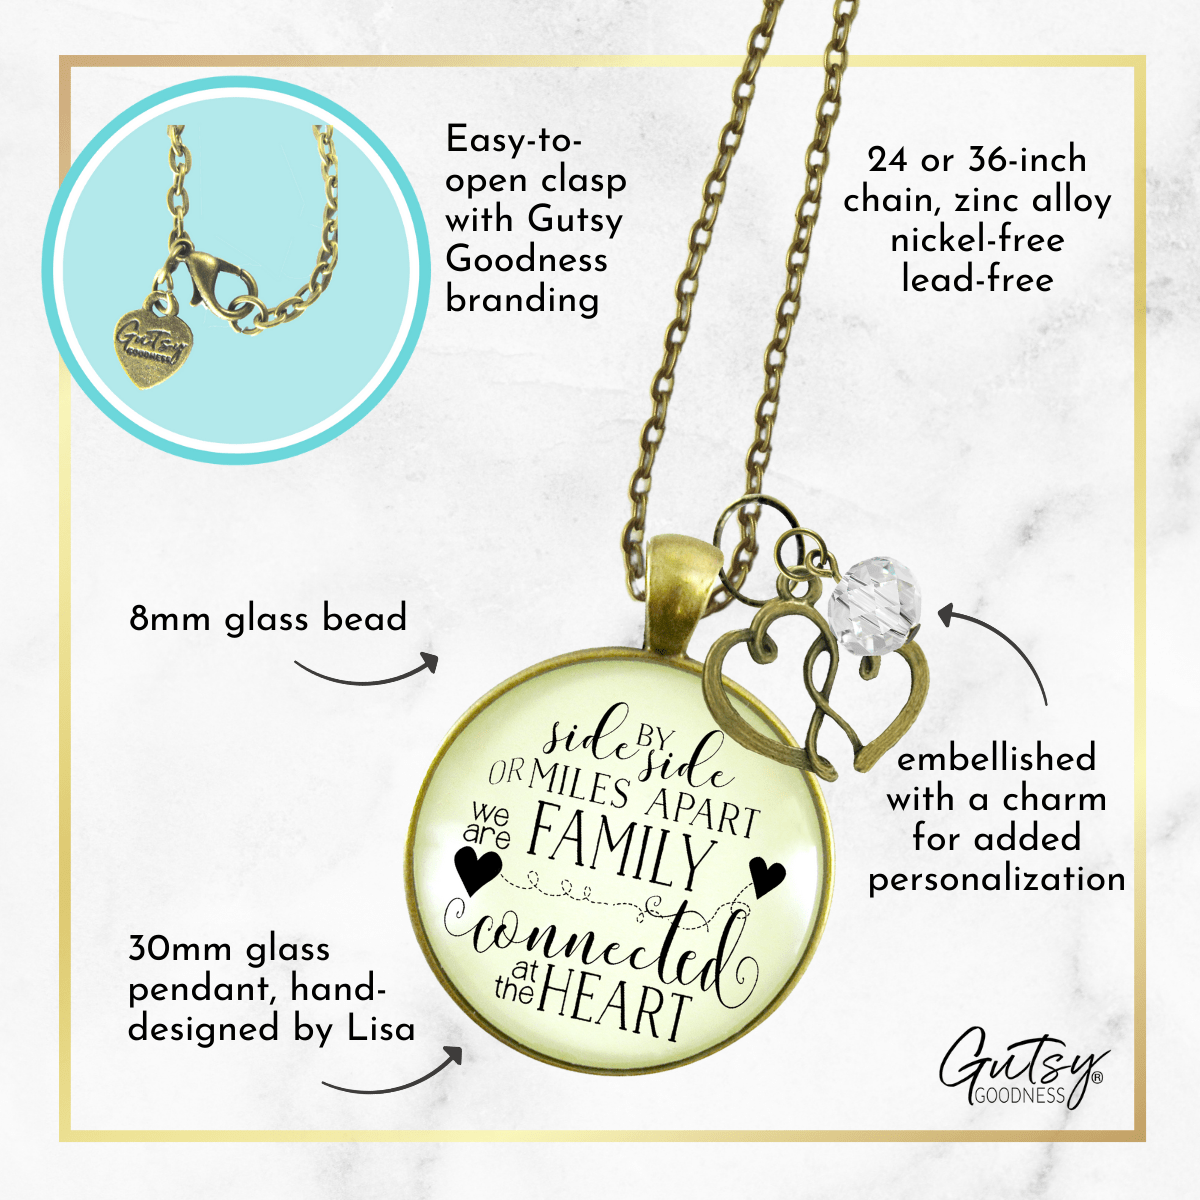 Gutsy Goodness My Family Necklace Side by Side Long Distance Gift Charm Jewelry - Gutsy Goodness;My Family Necklace Side By Side Long Distance Gift Charm Jewelry - Gutsy Goodness Handmade Jewelry Gifts